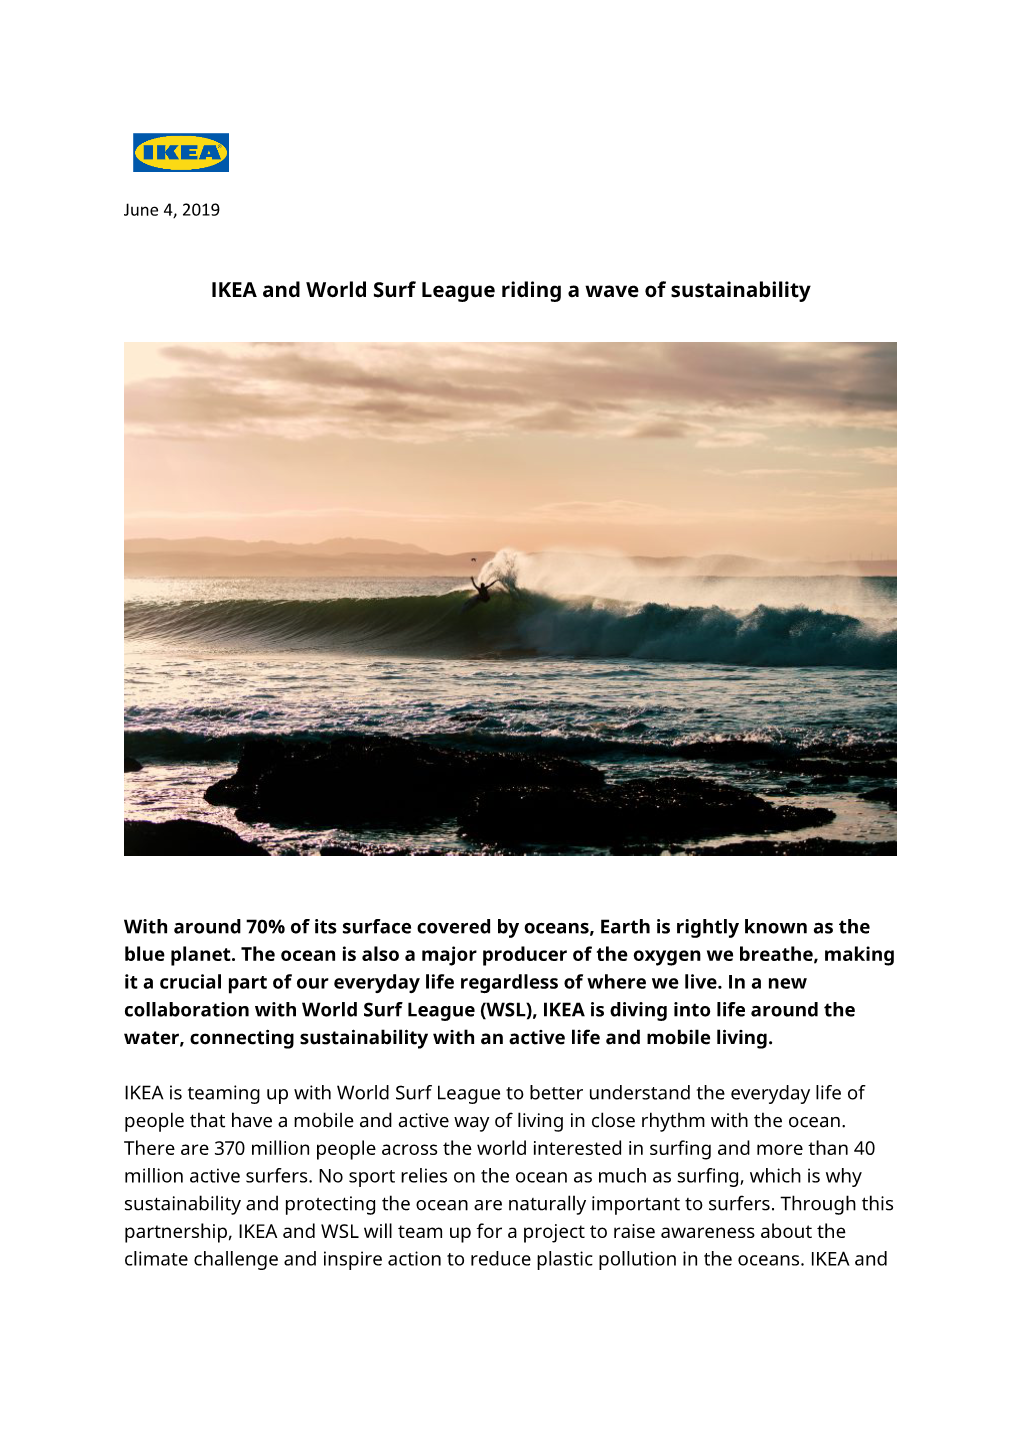 IKEA and World Surf League Riding a Wave of Sustainability Open